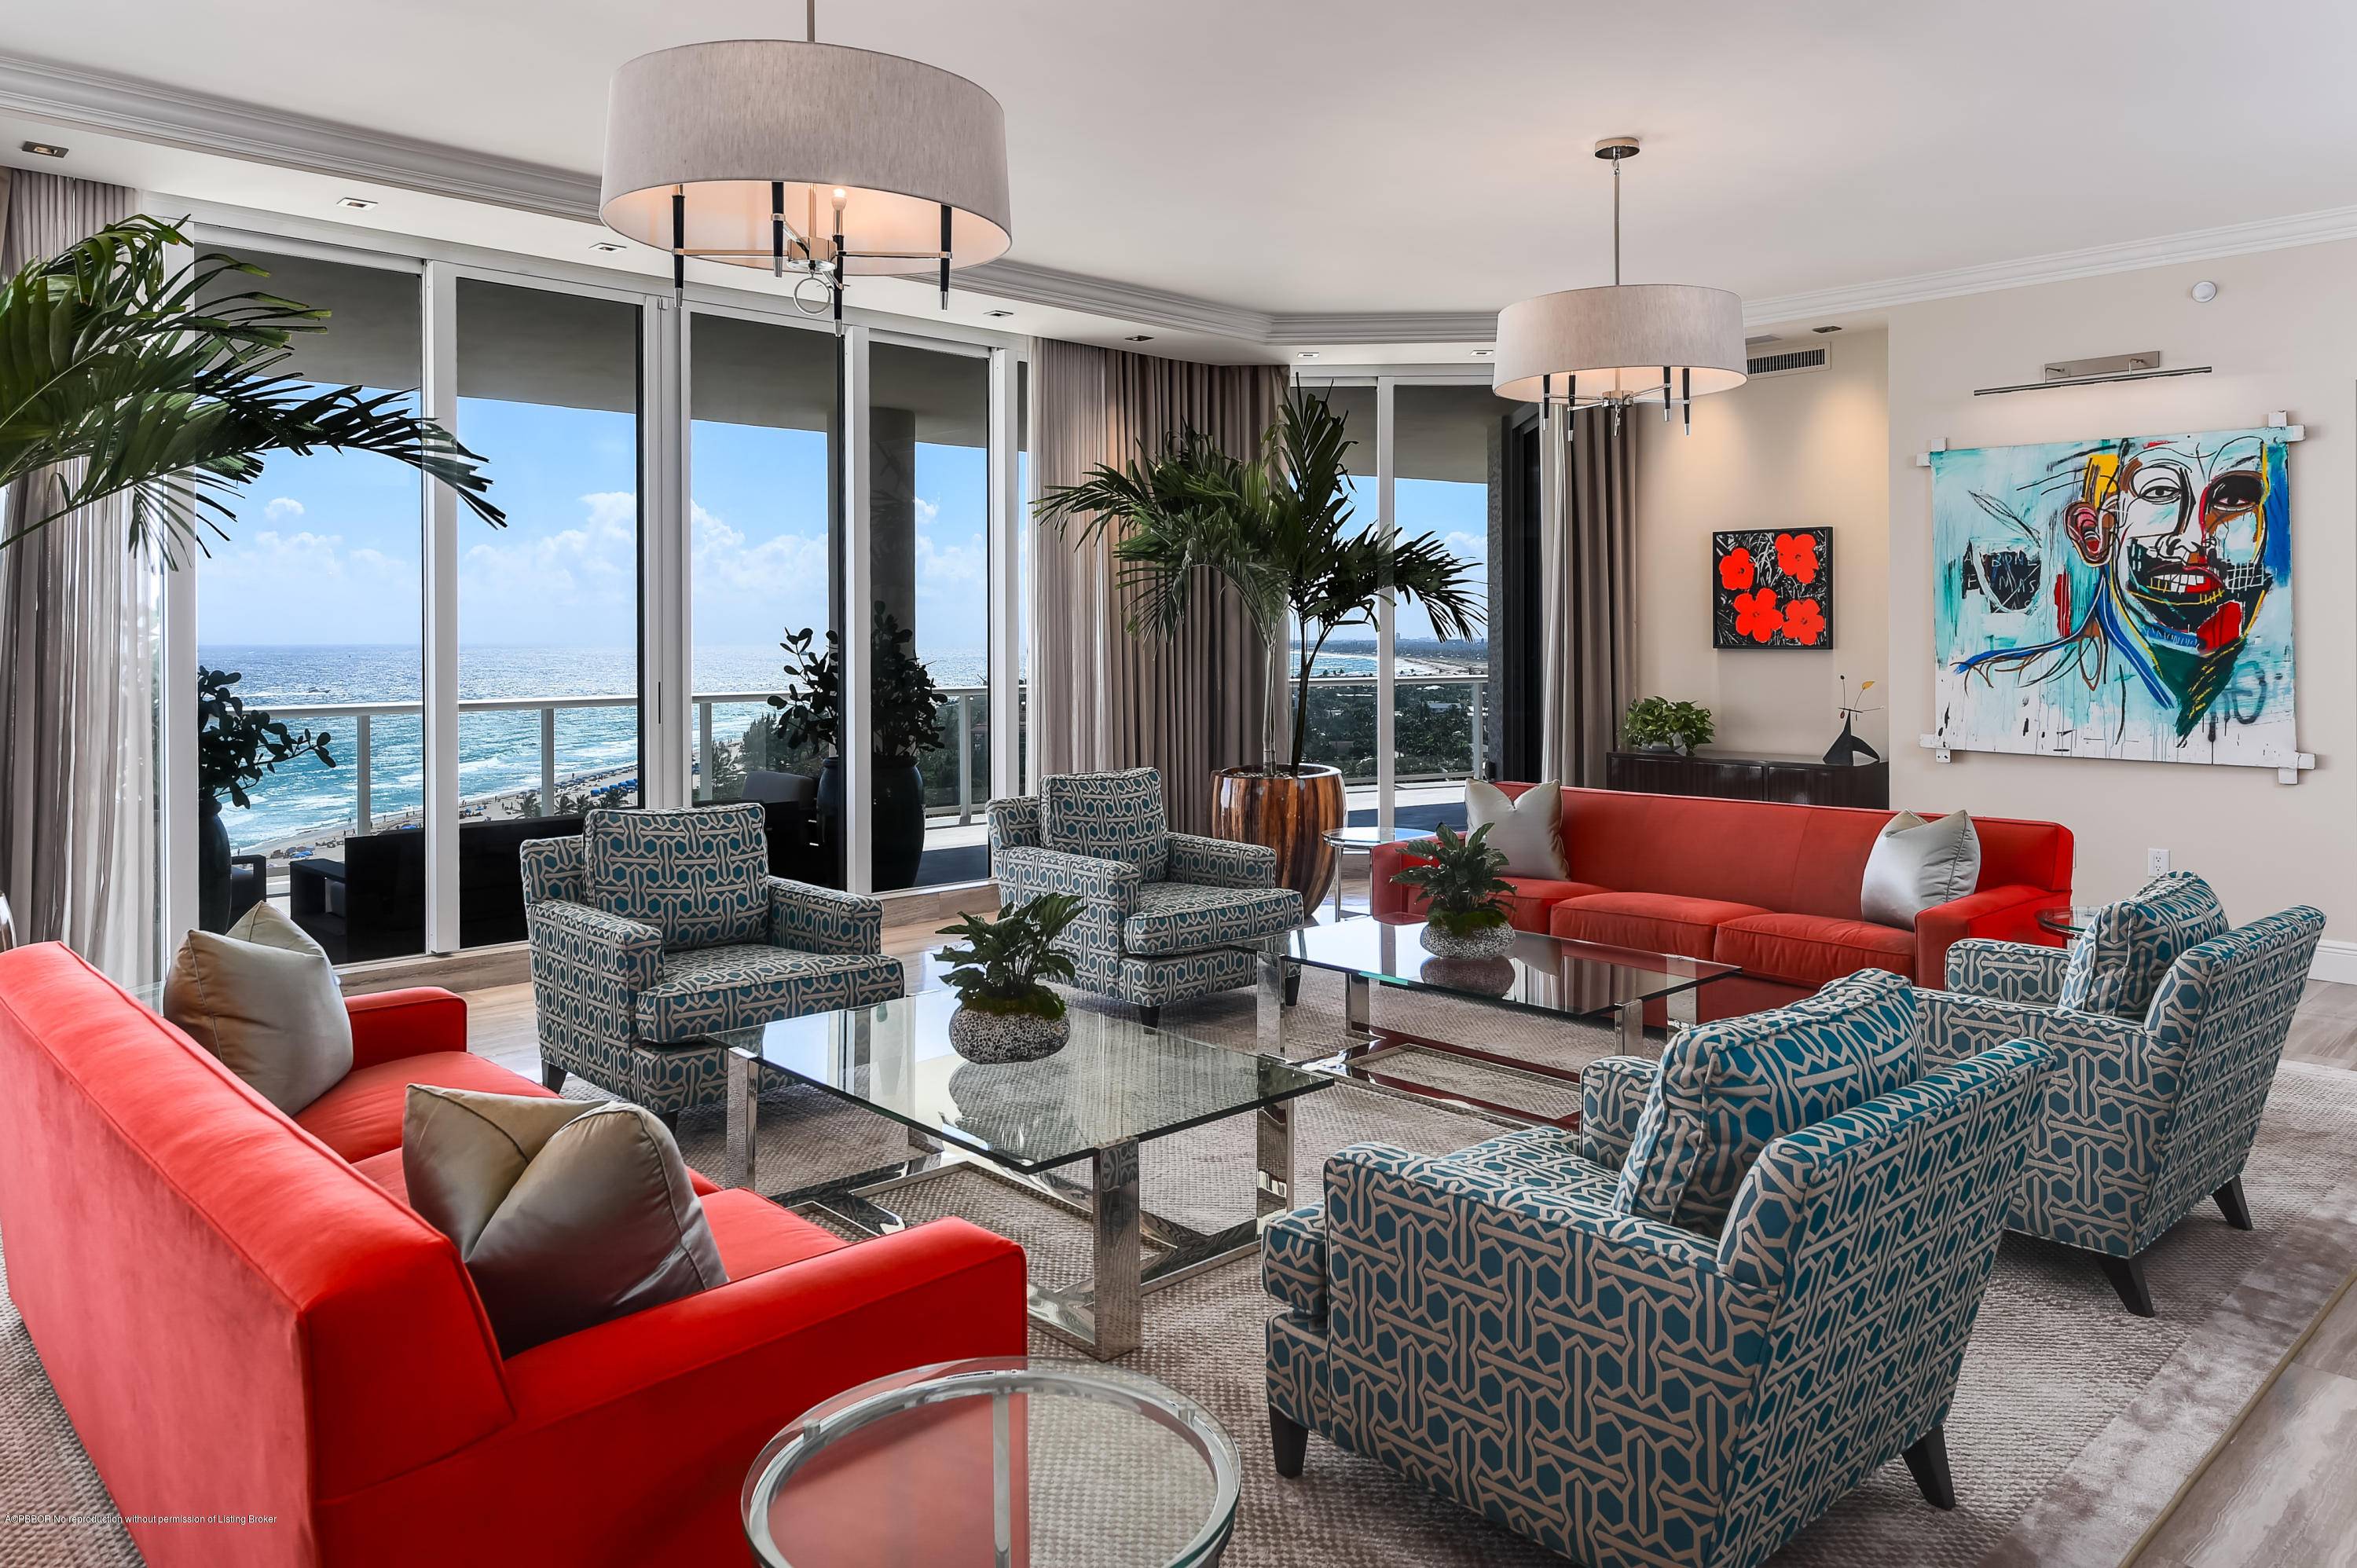 This is truly a spectacular furnished property, located in the exclusive The Ritz Carlton Residences on Singer Island.